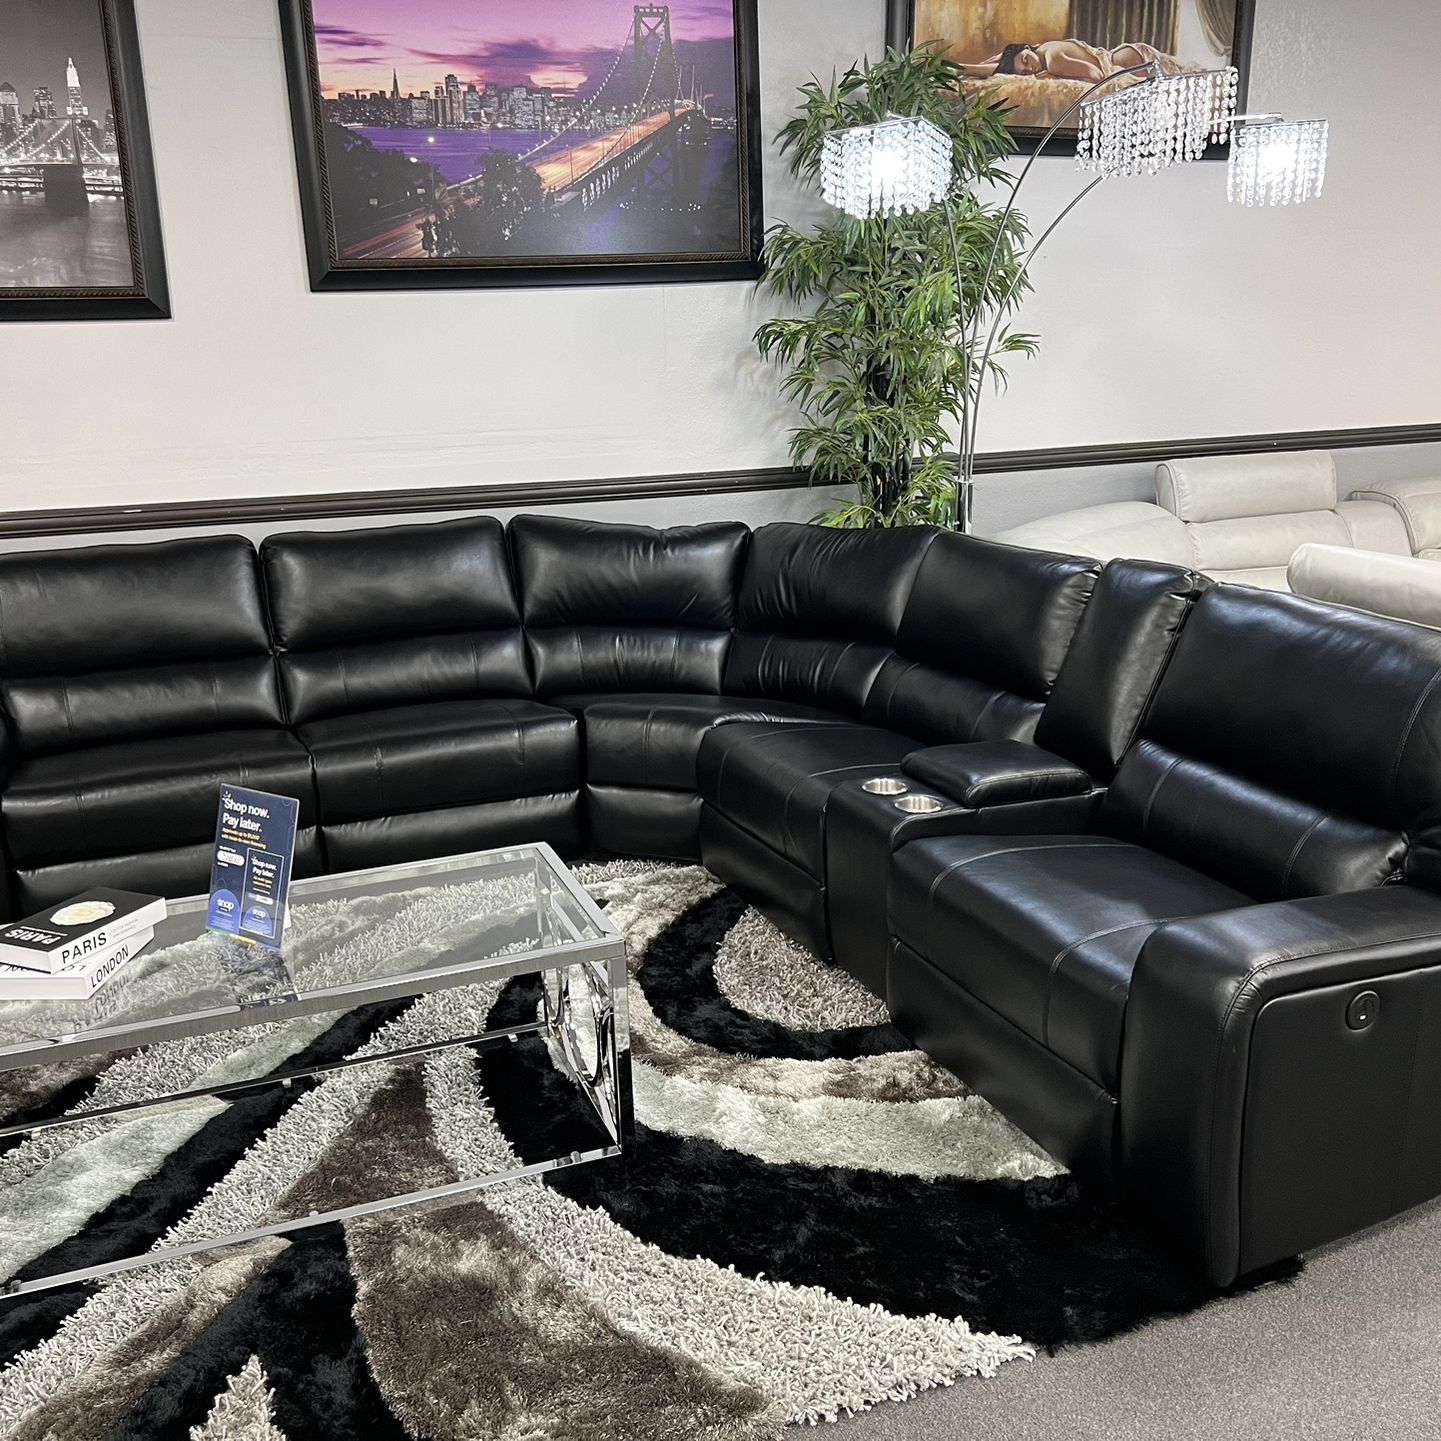 Black Leather Sofa Sectional w/ Power Motion Recliners & USB Ports 